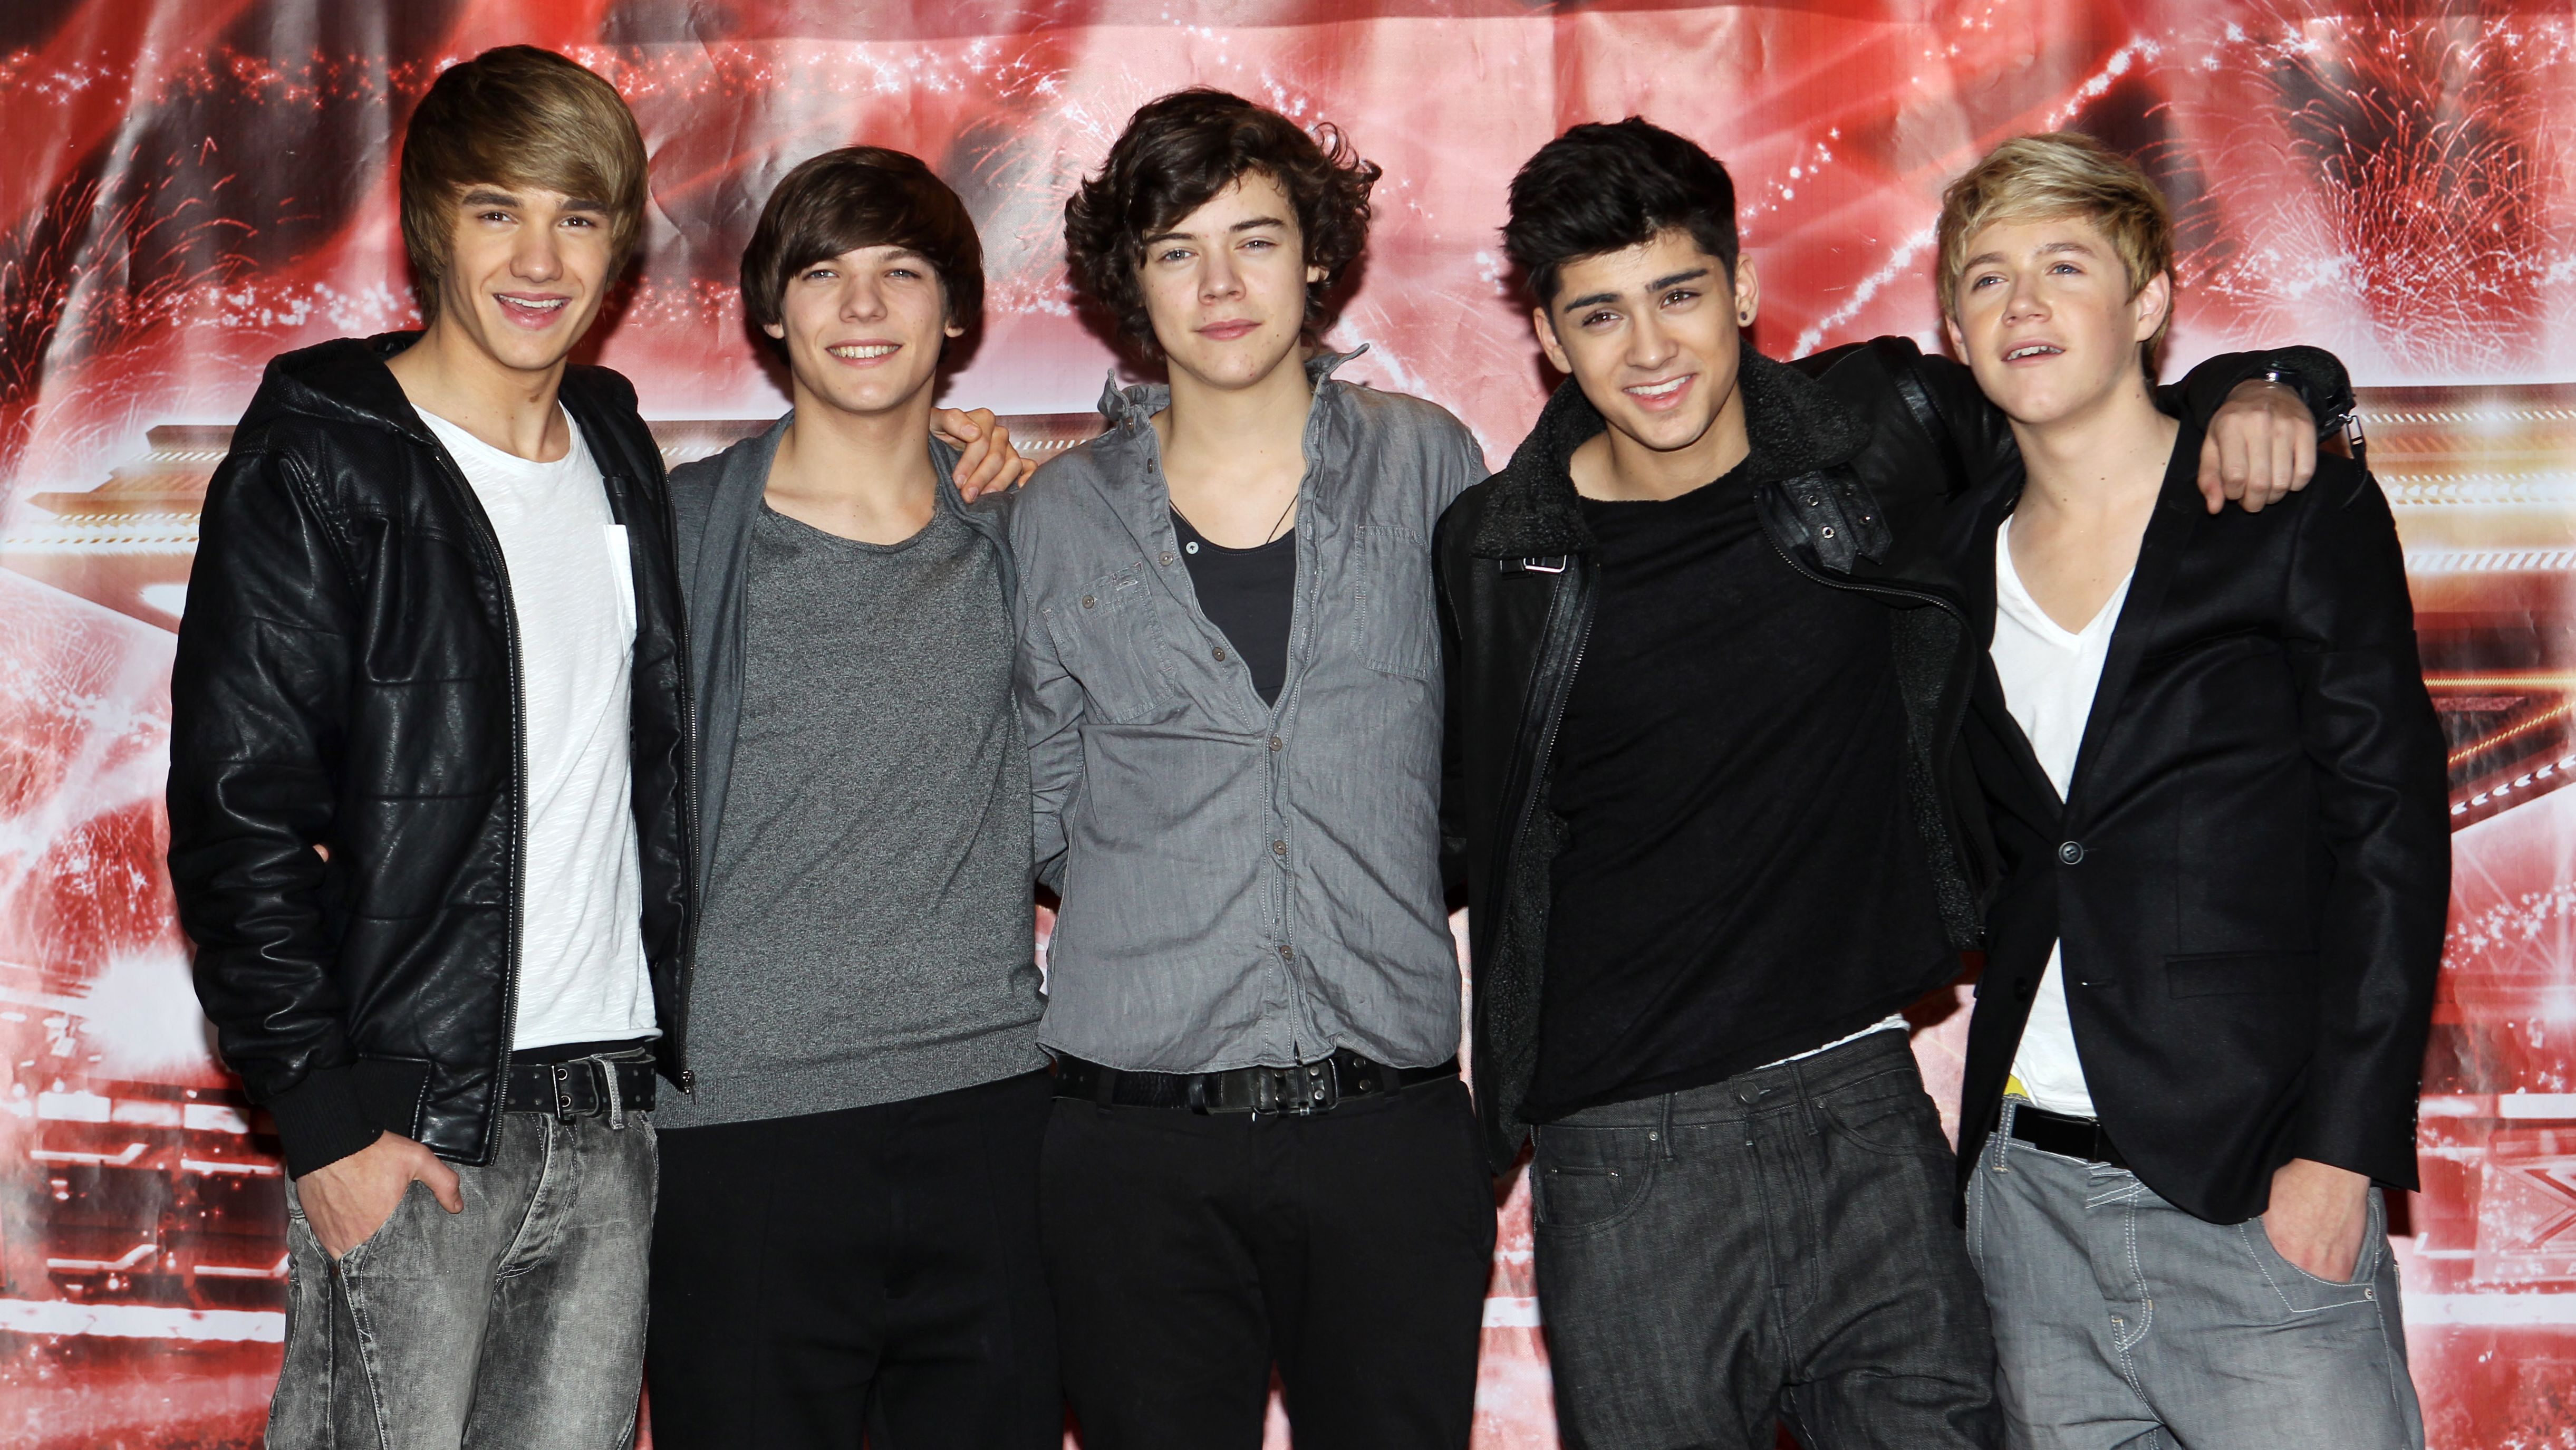 A look back at One Direction, as the band celebrates 10-year anniversary